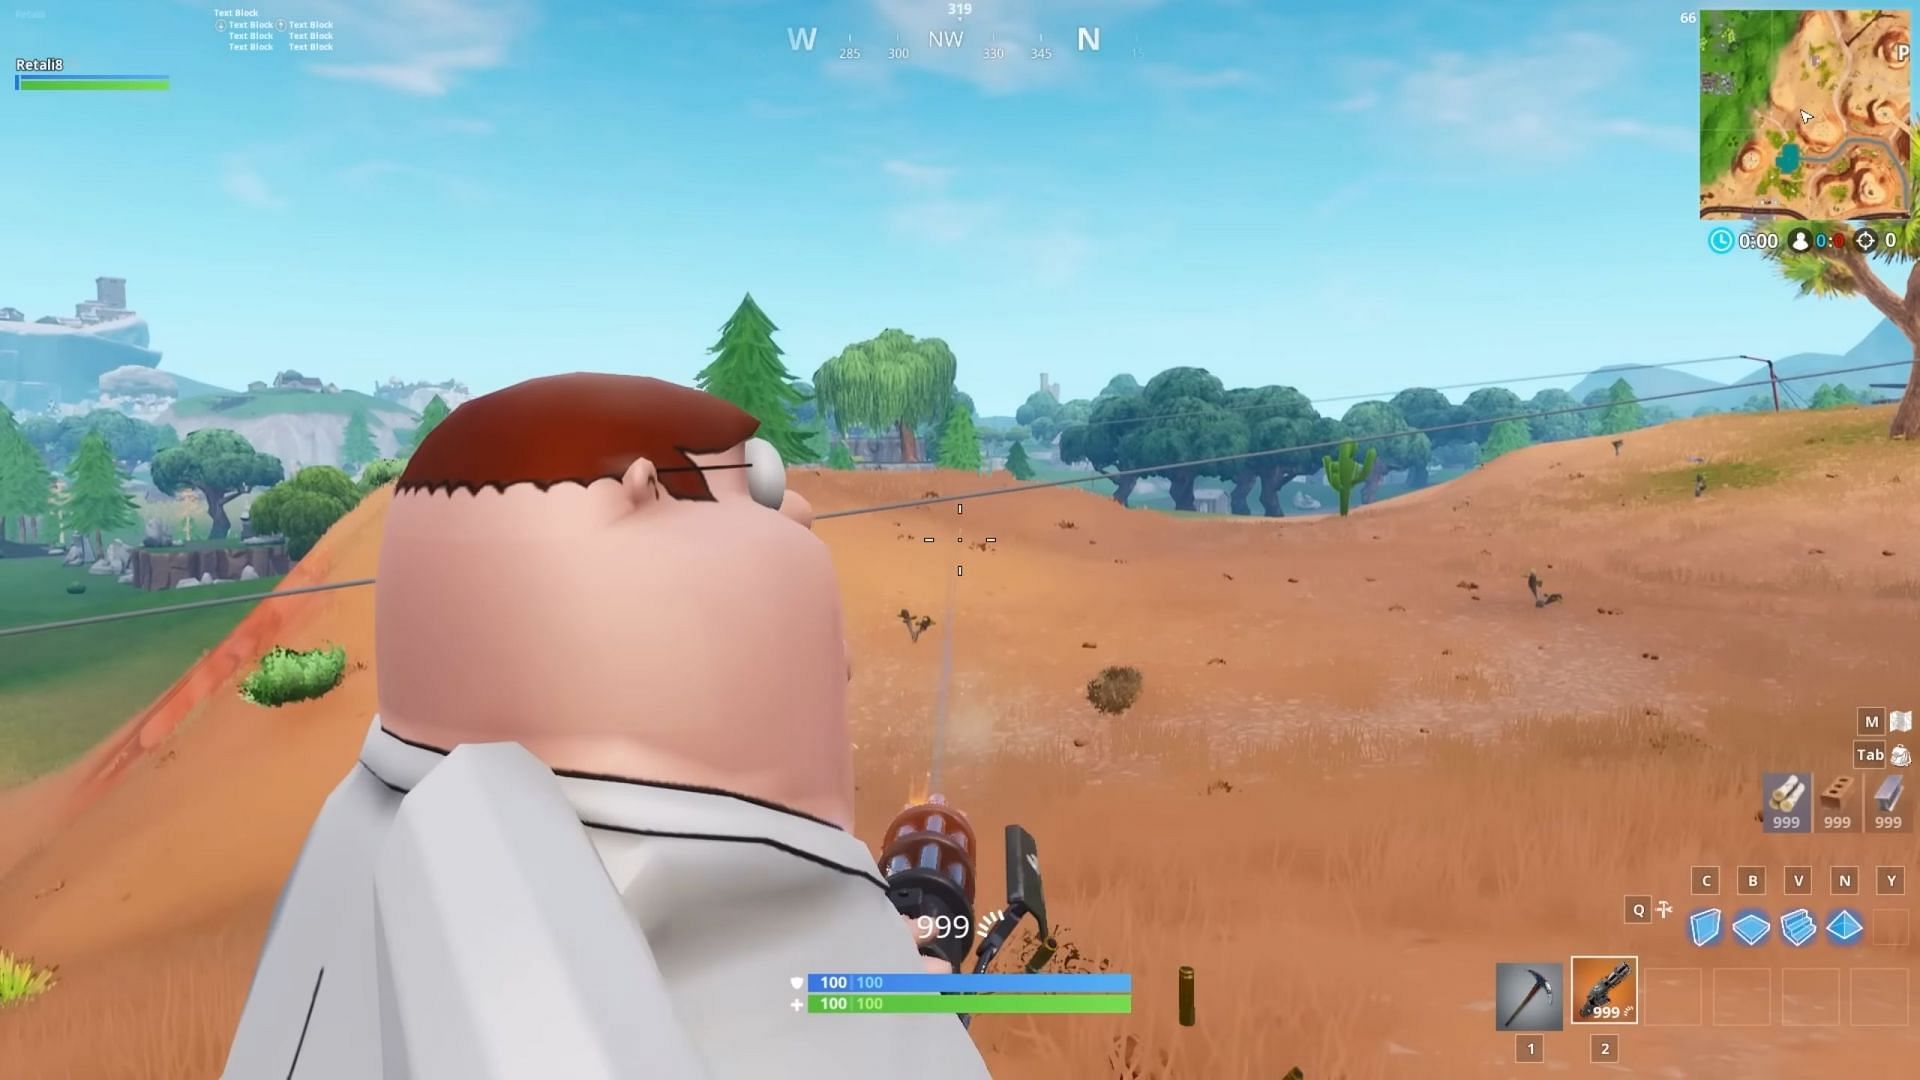 This is what Peter Griffin looks like in the popular battle royale video game (Image via Retali8/YouTube)